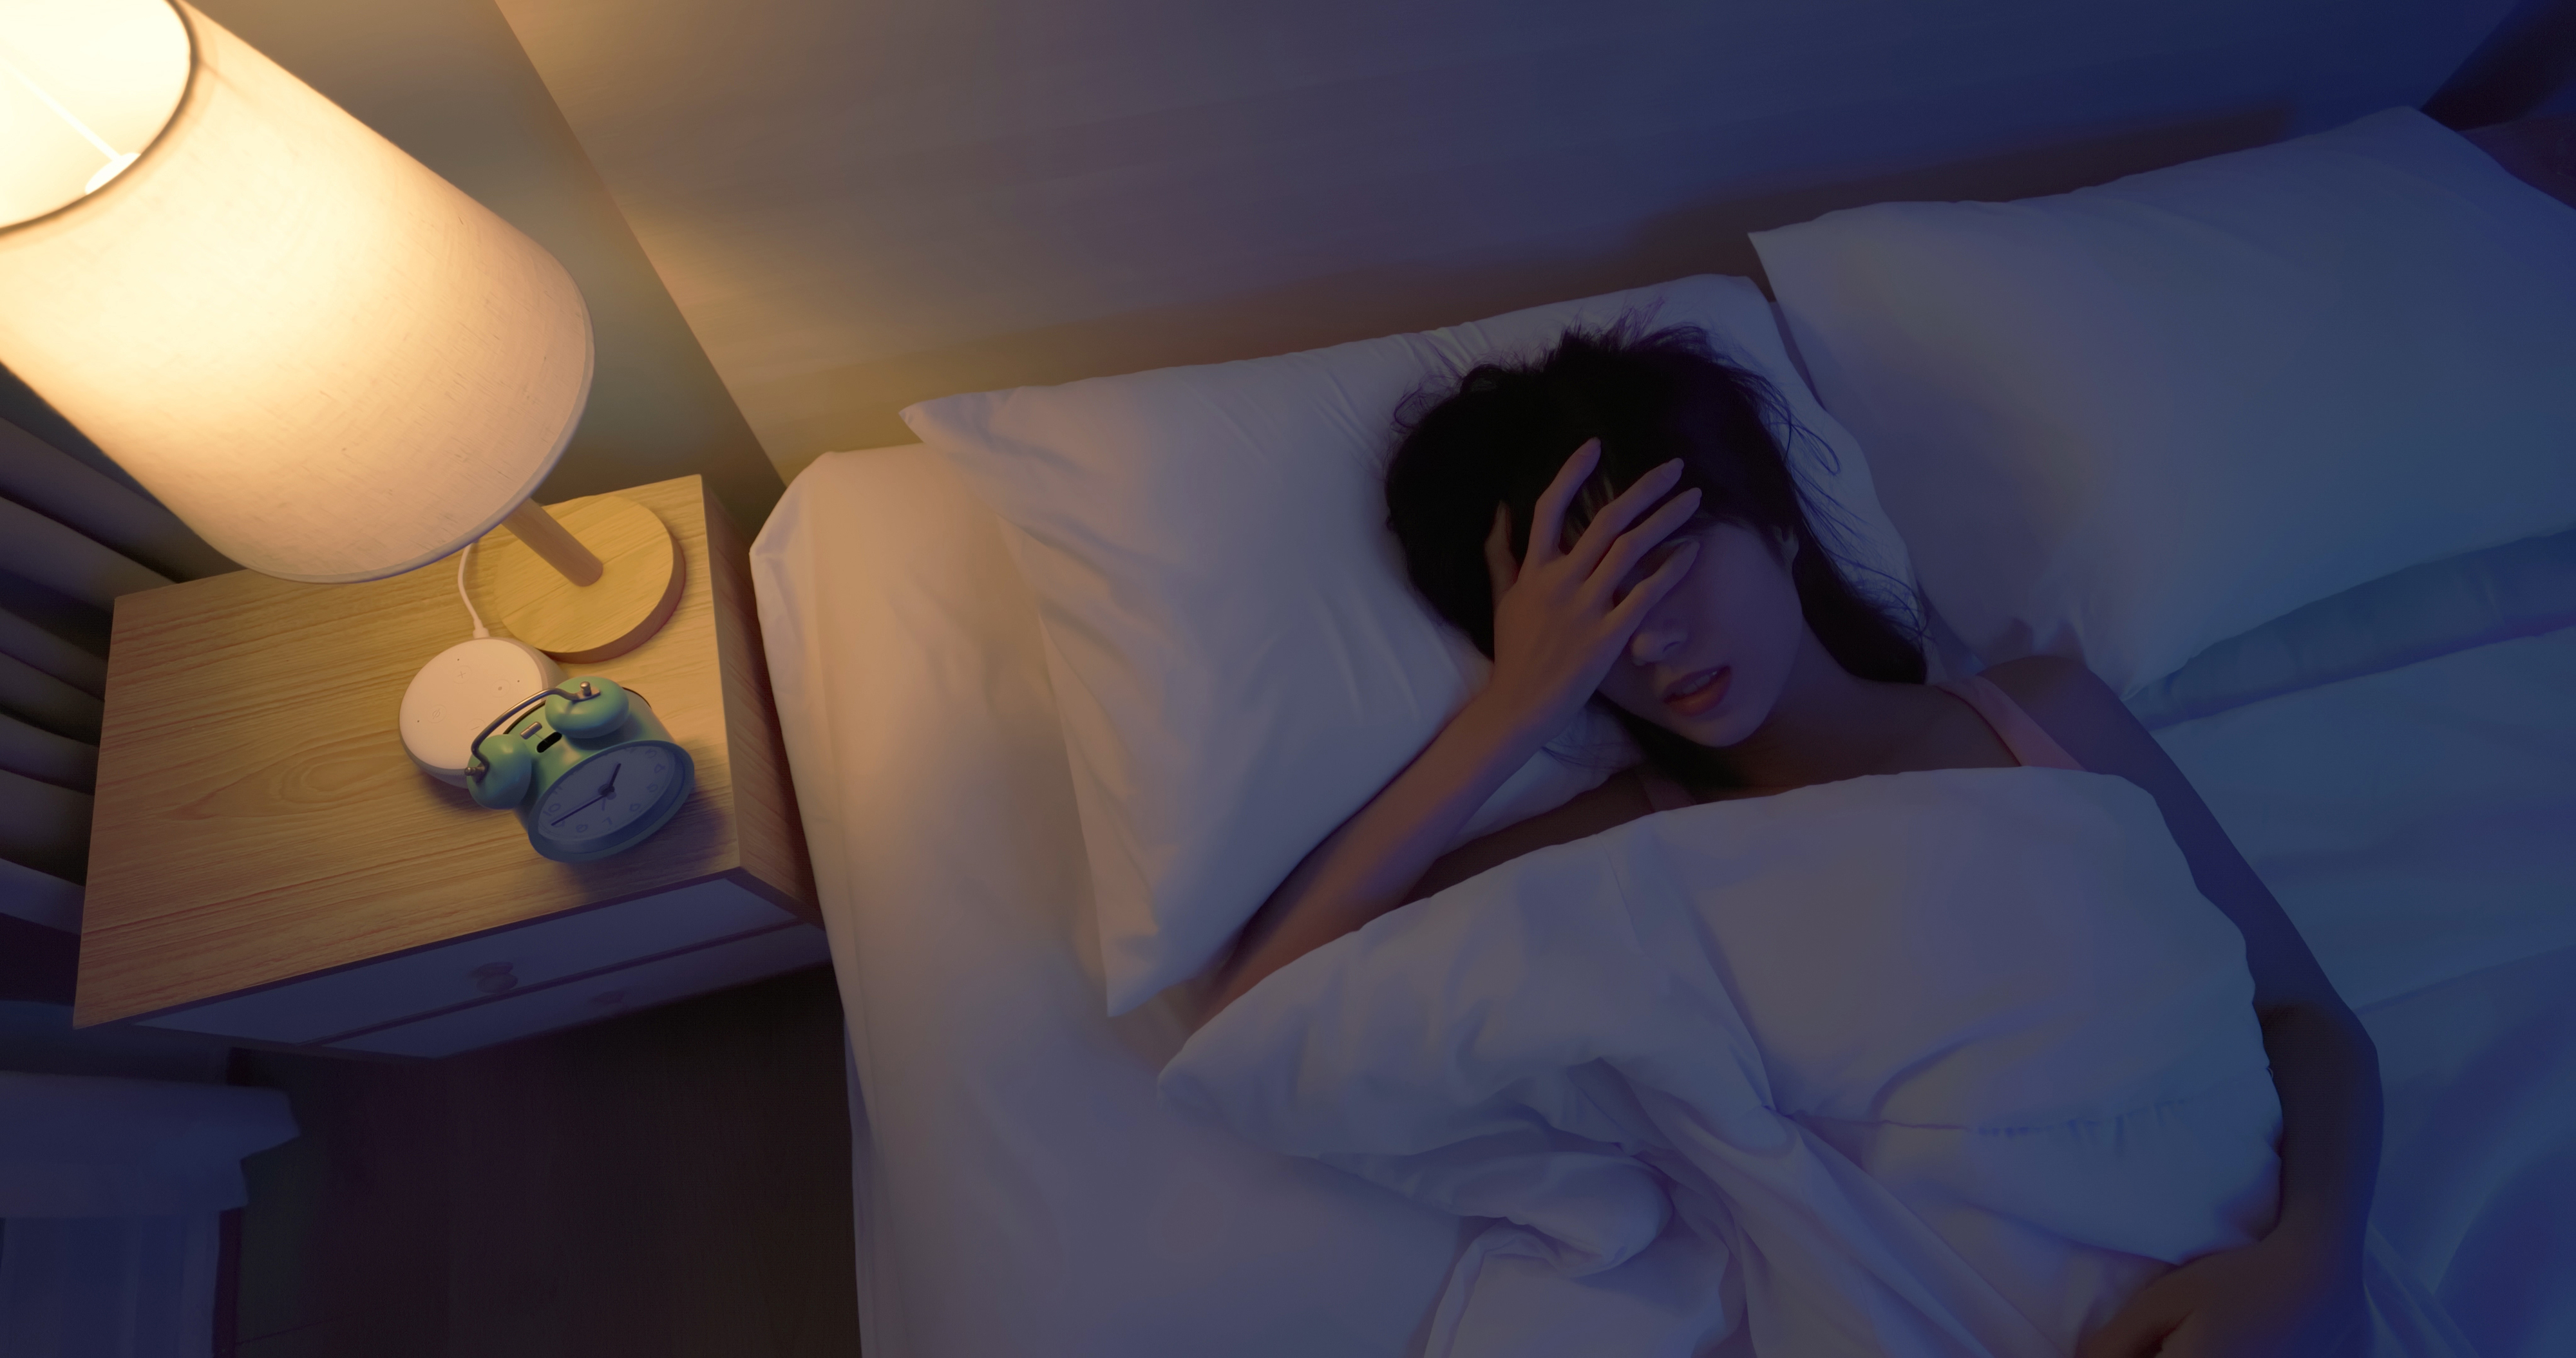 Woman in bed with hand on forehead, alarm clock on nightstand, illustrating sleep troubles for a health article